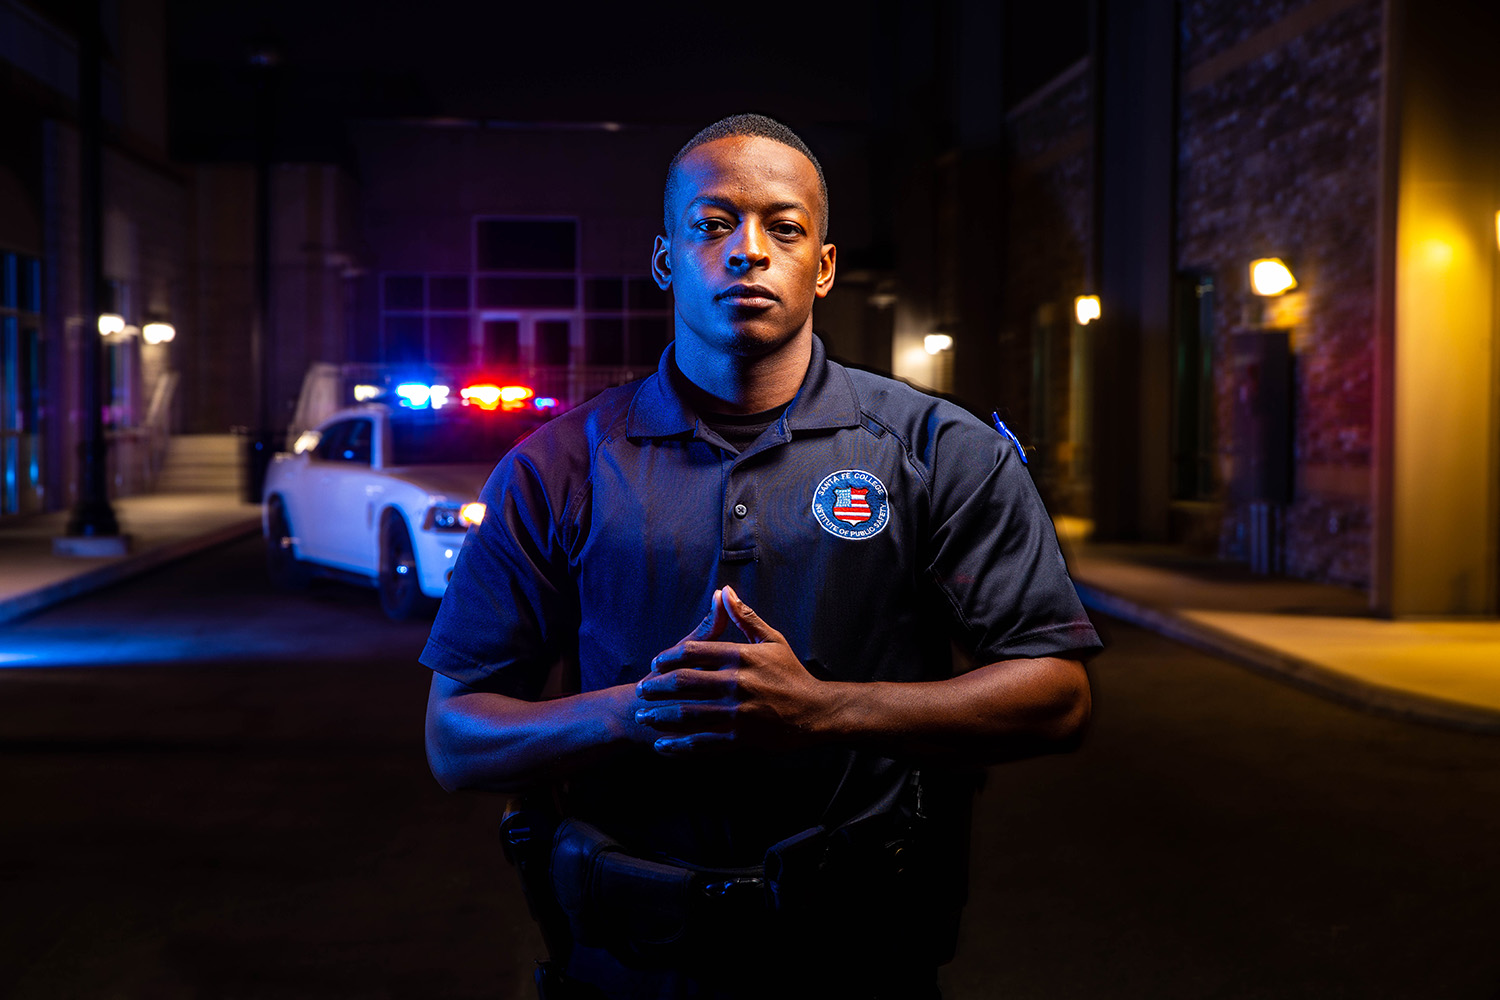 Santa Fe College Institute of Public Safety officer cadet portrait photographed on Oct. 1, 2020 (Matt Stamey/Santa Fe College ) ***Subjects Have Releases***